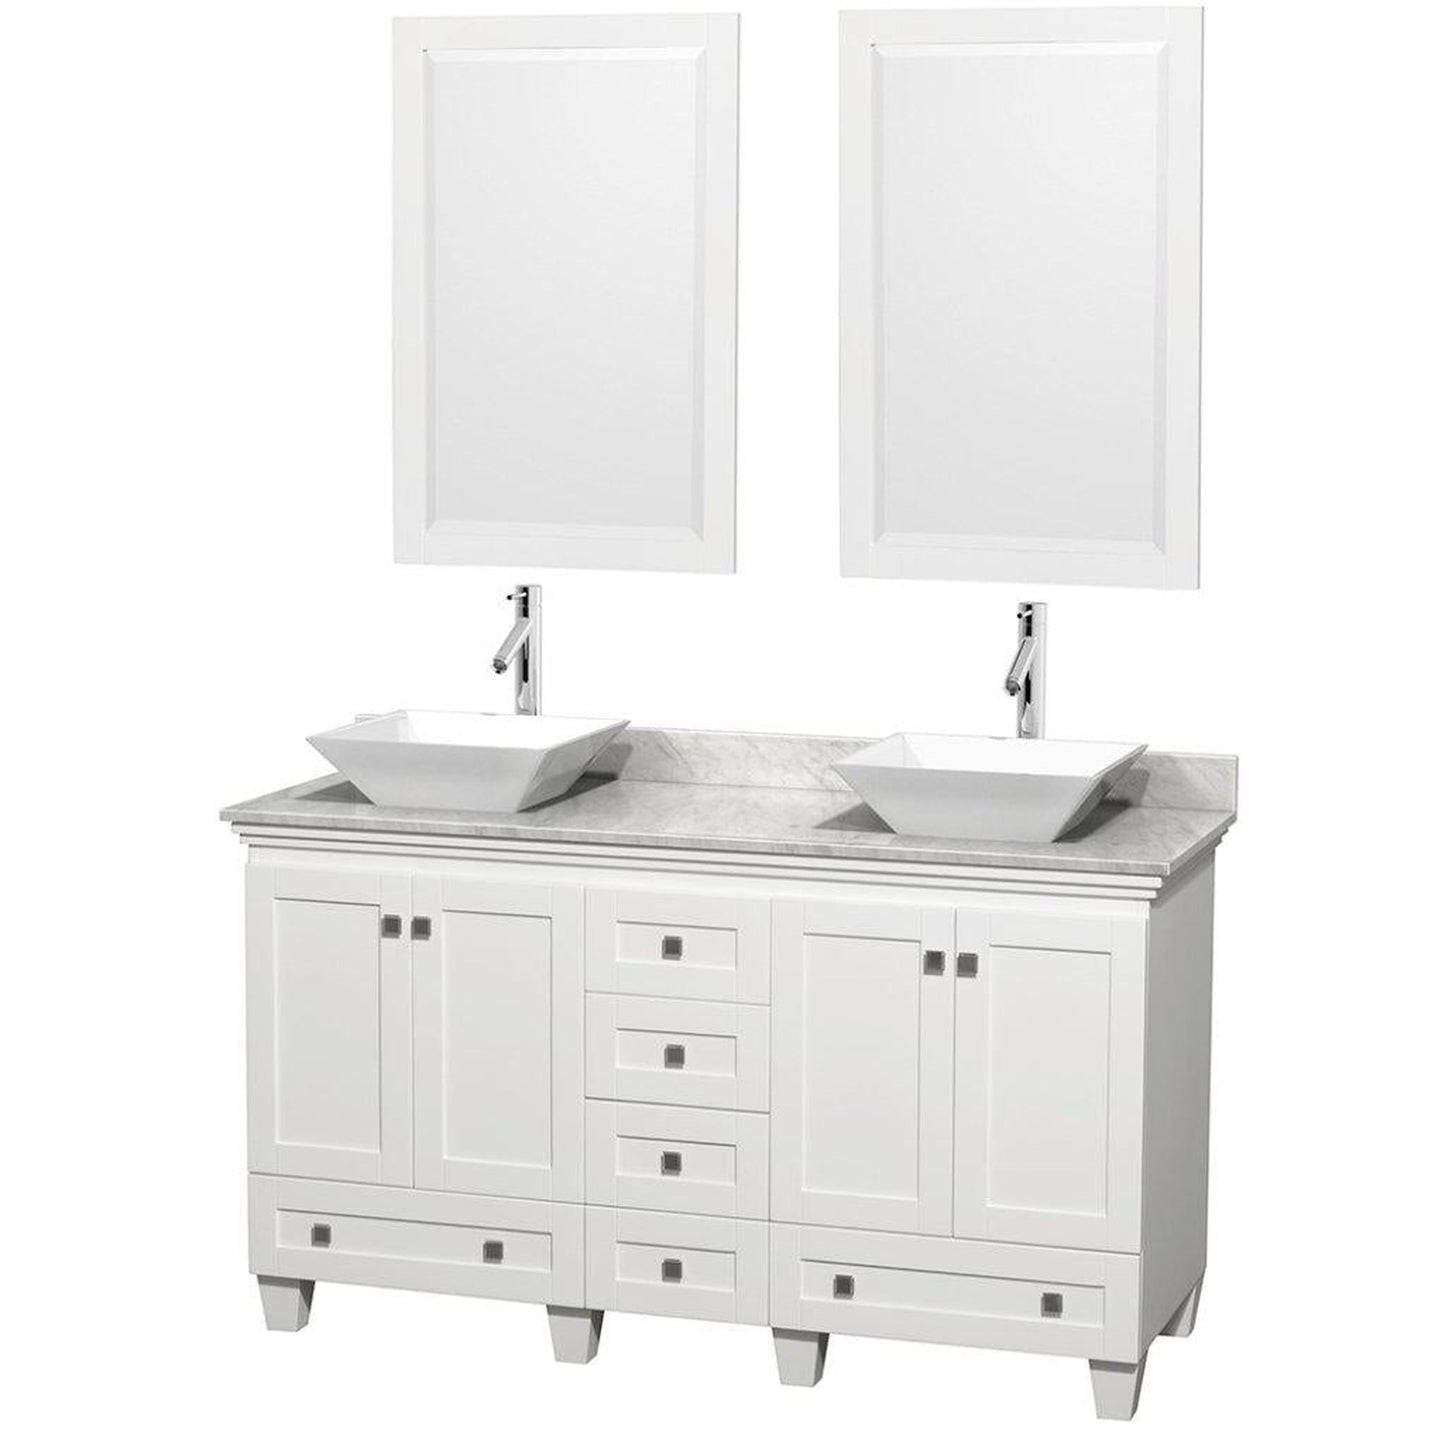 Wyndham Collection Acclaim 60" White Double Bathroom Vanity Set With White Carrara Marble Countertop, Pyra White Sinks and 2 Mirrors